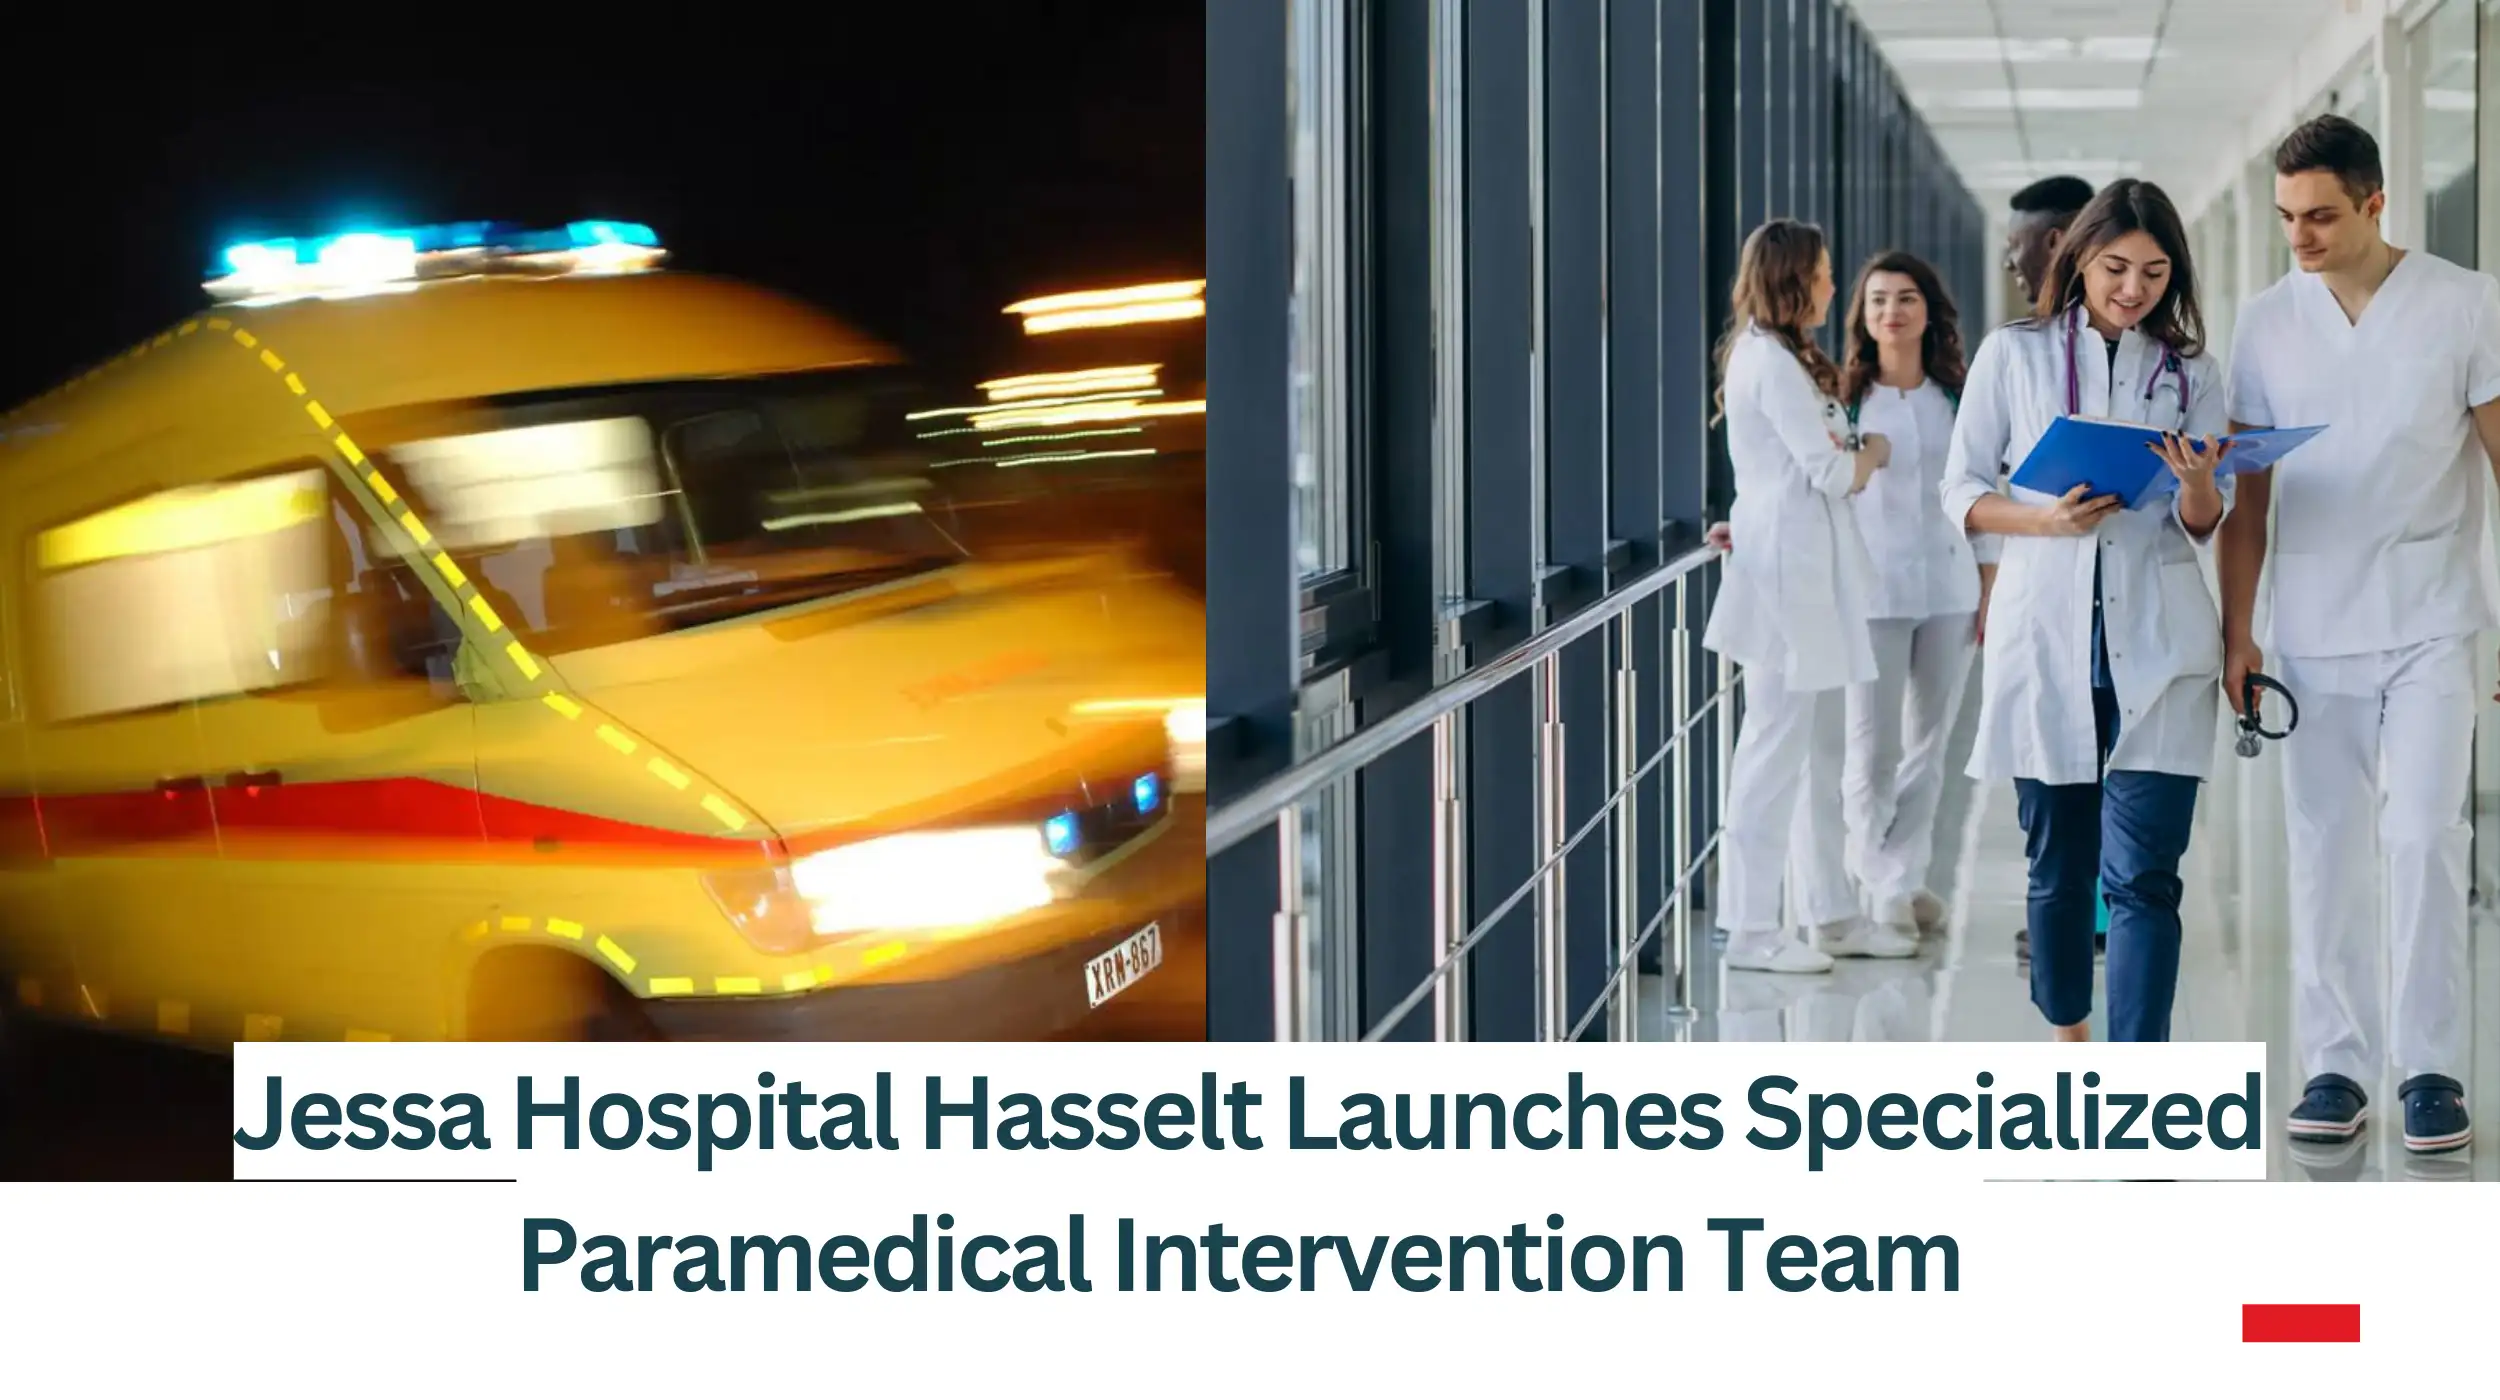 Jessa-Hospital-Hasselt-Launches-Specialized-Paramedical-Intervention-Team